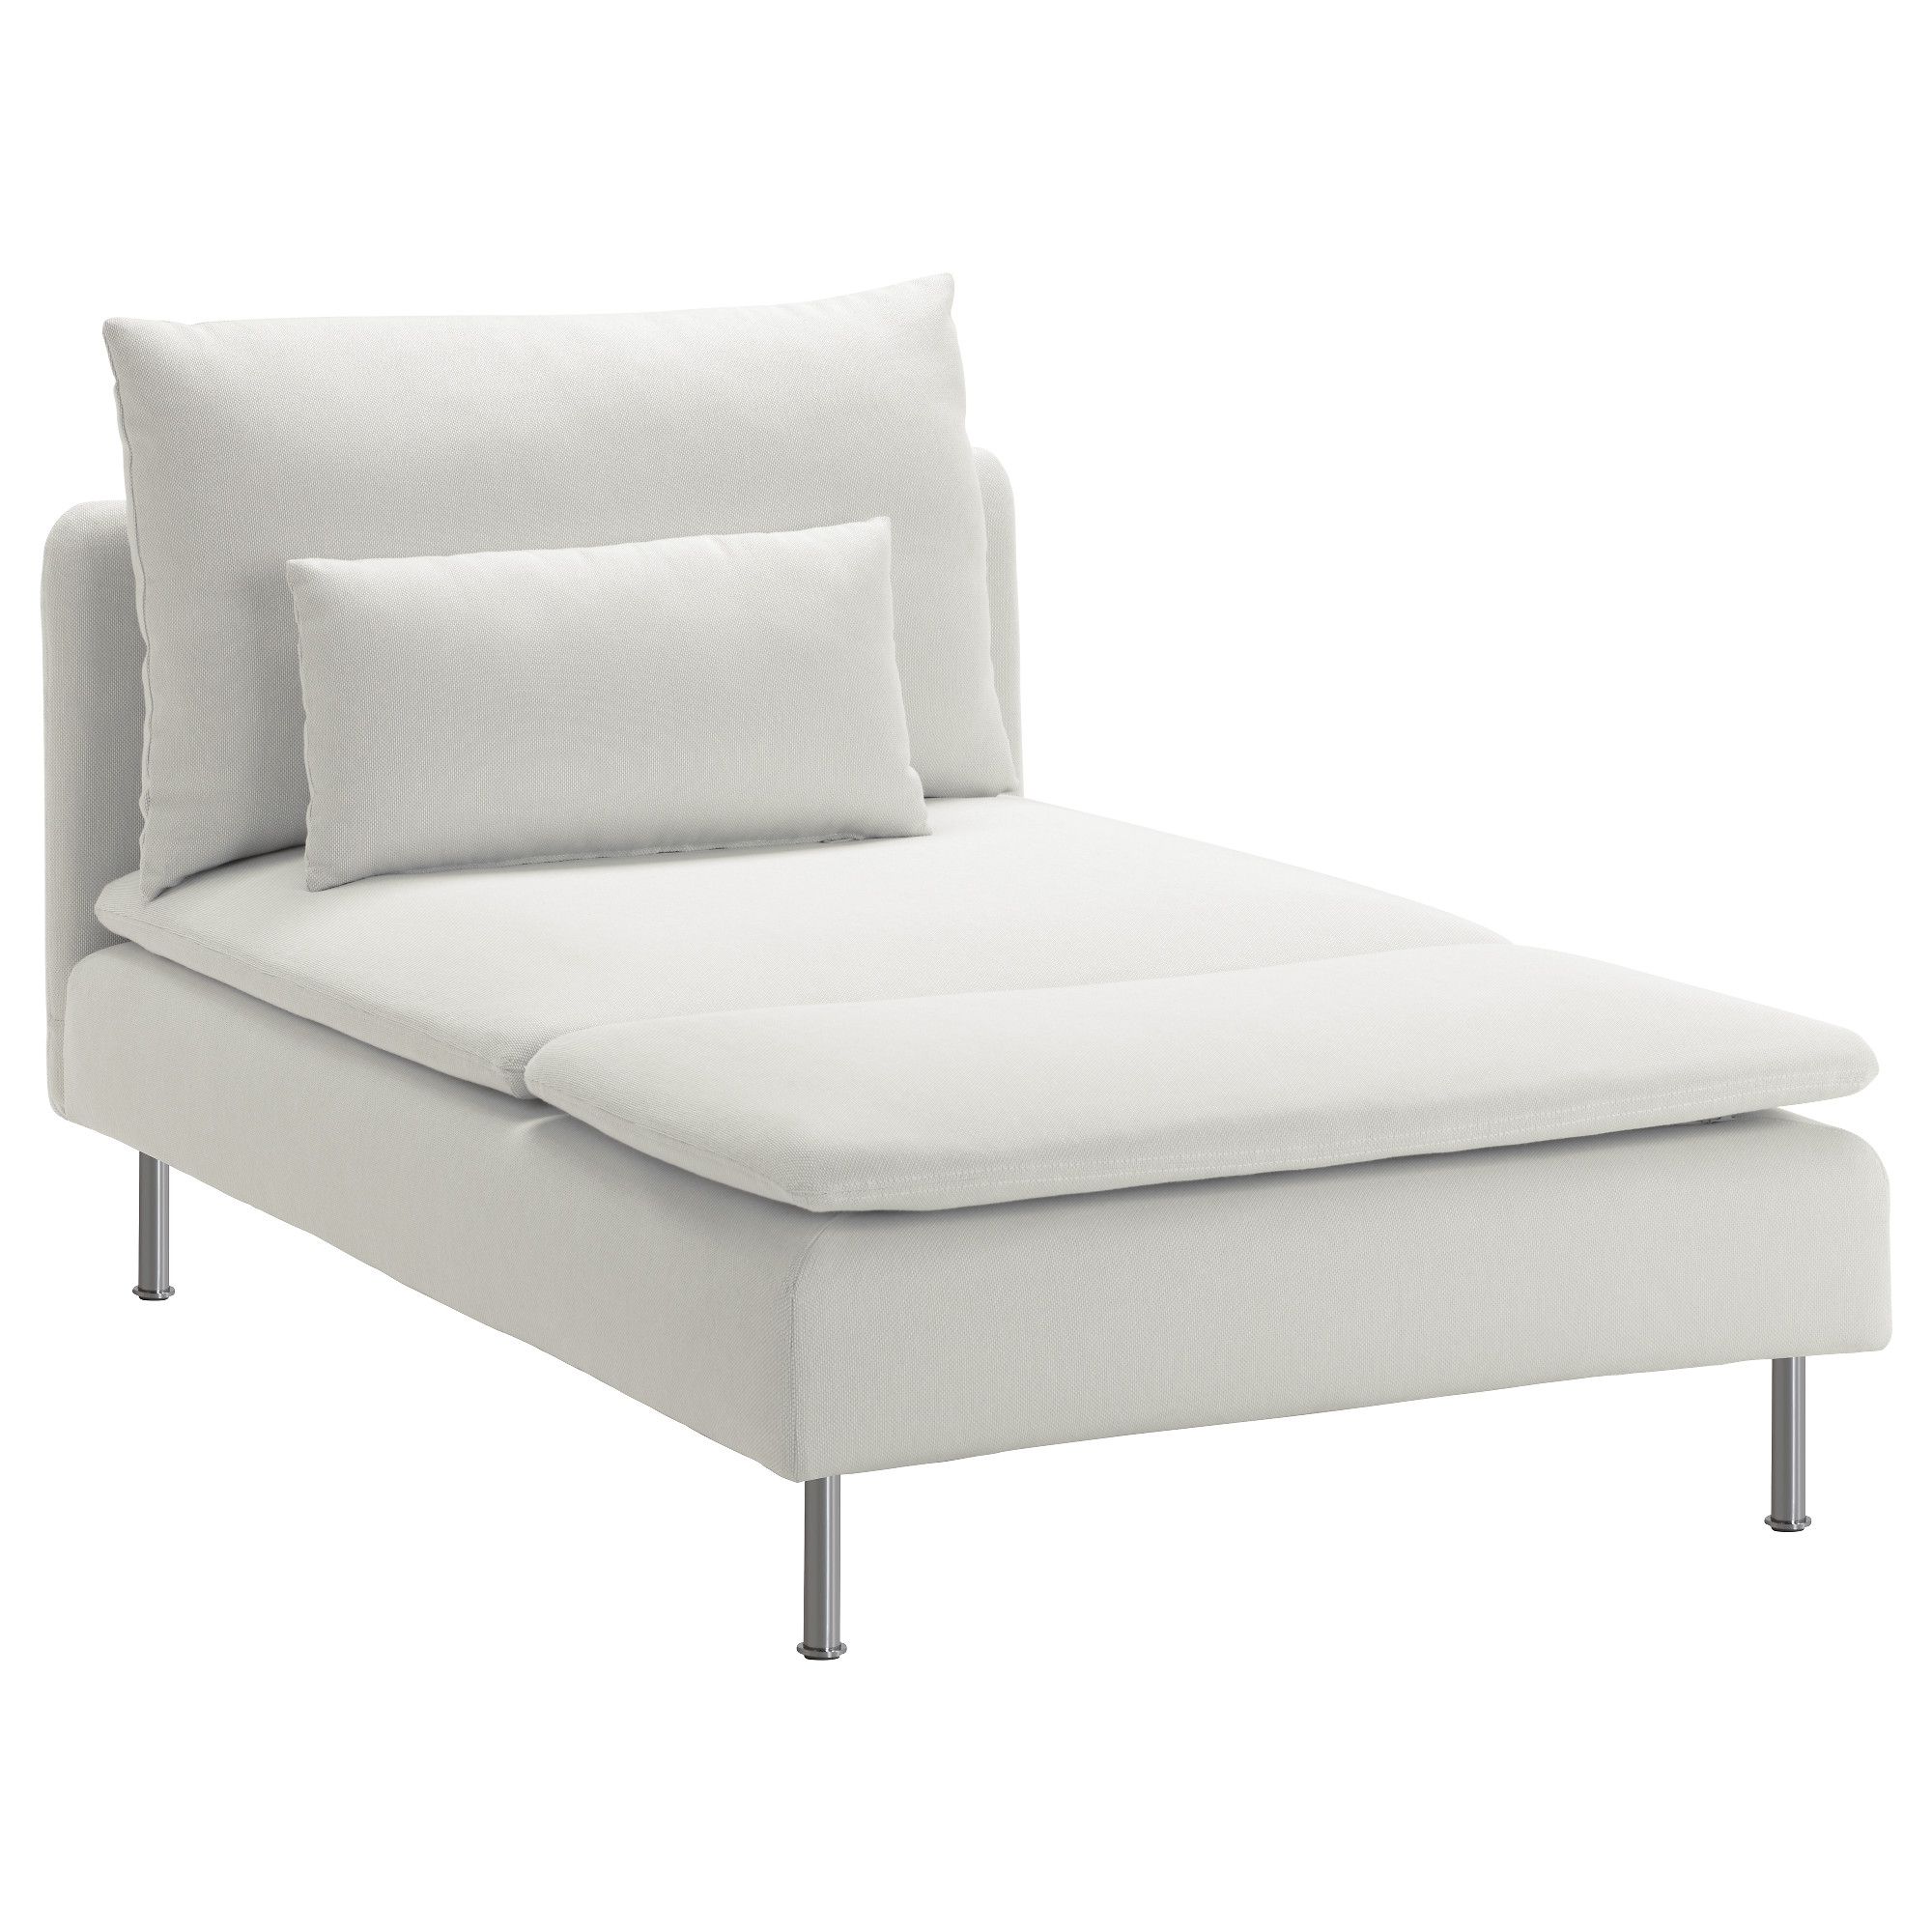 Söderhamn Chaise – Samsta Dark Gray – Ikea In Current Chaise Lounge Beds (View 1 of 15)